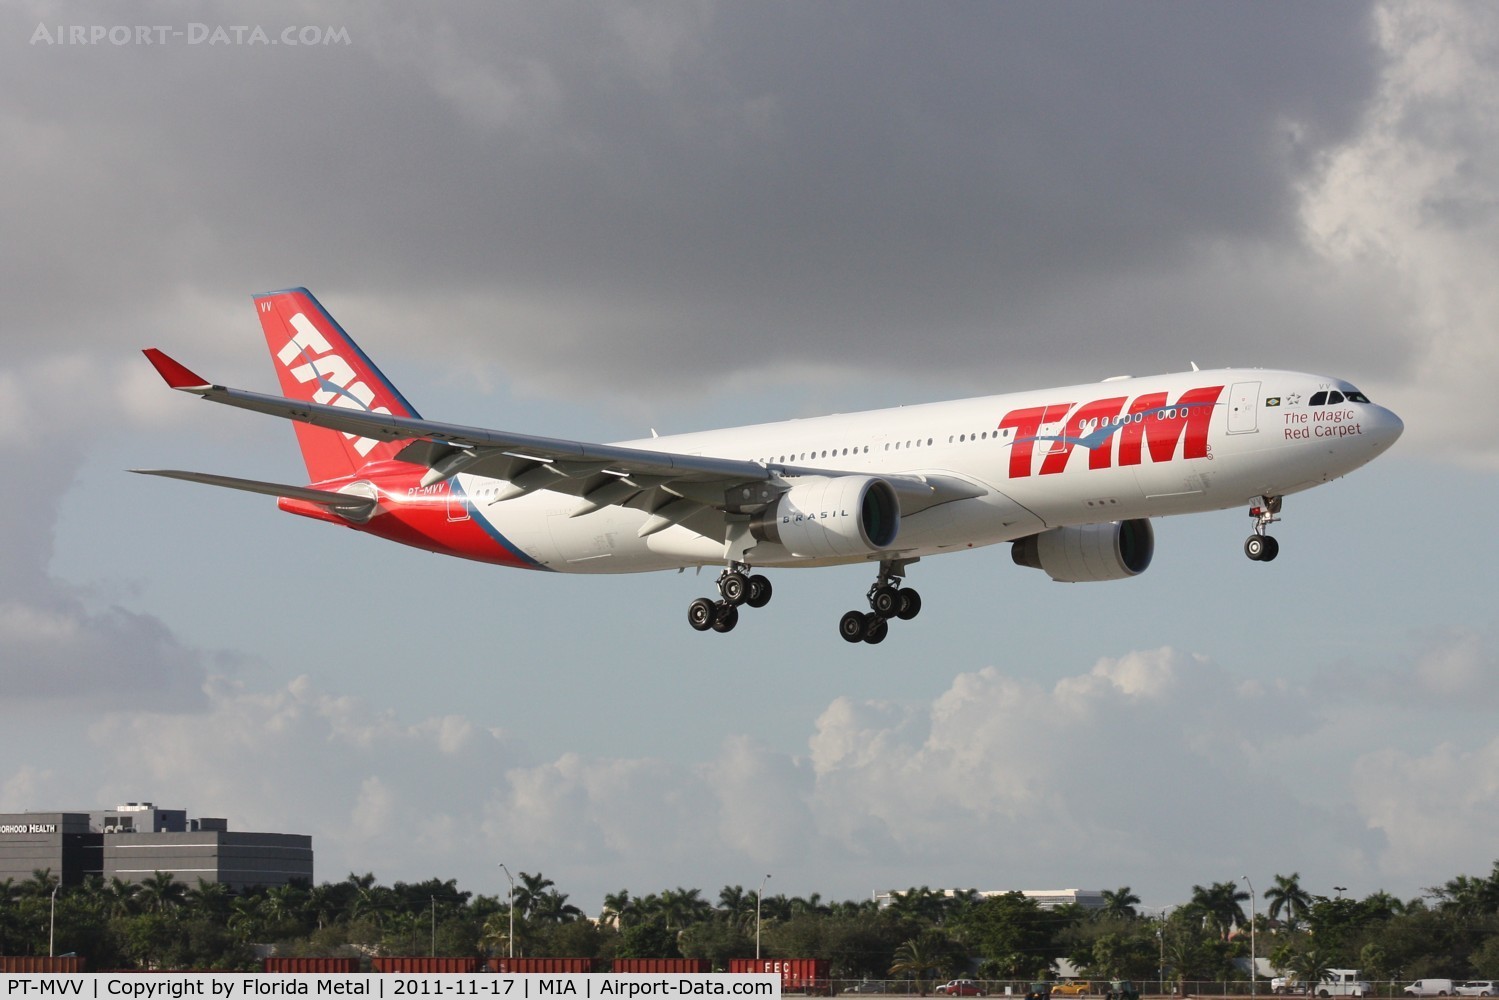 PT-MVV, 2011 Airbus A330-223 C/N 1221, Brand new 2011 built TAM A330 doing a low approach for Runway 9